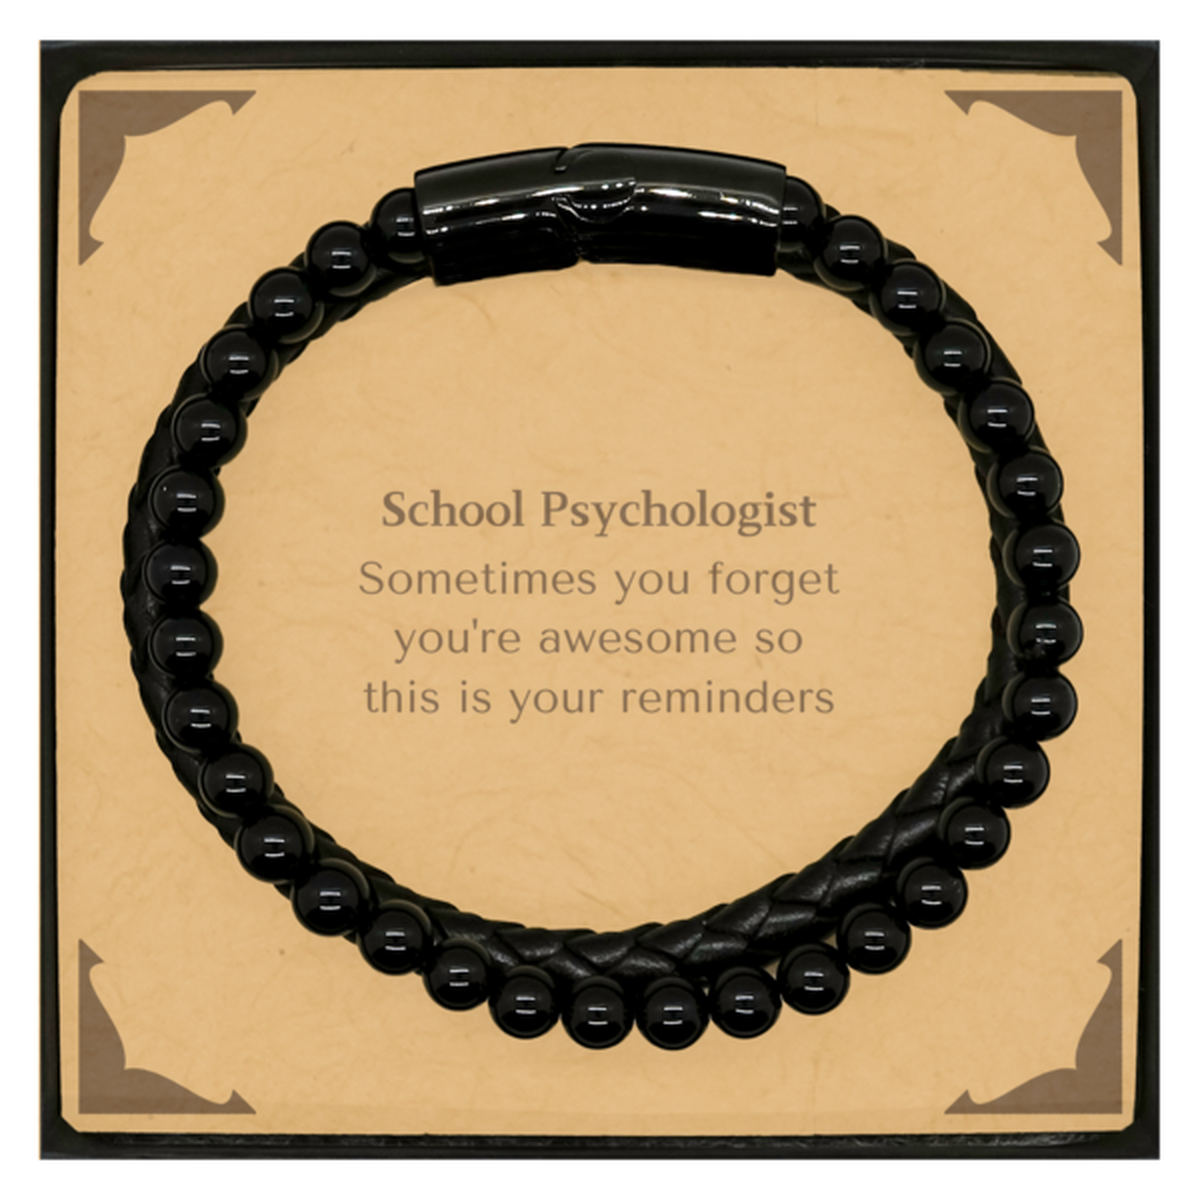 Sentimental School Psychologist Stone Leather Bracelets, School Psychologist Sometimes you forget you're awesome so this is your reminders, Graduation Christmas Birthday Gifts for School Psychologist, Men, Women, Coworkers